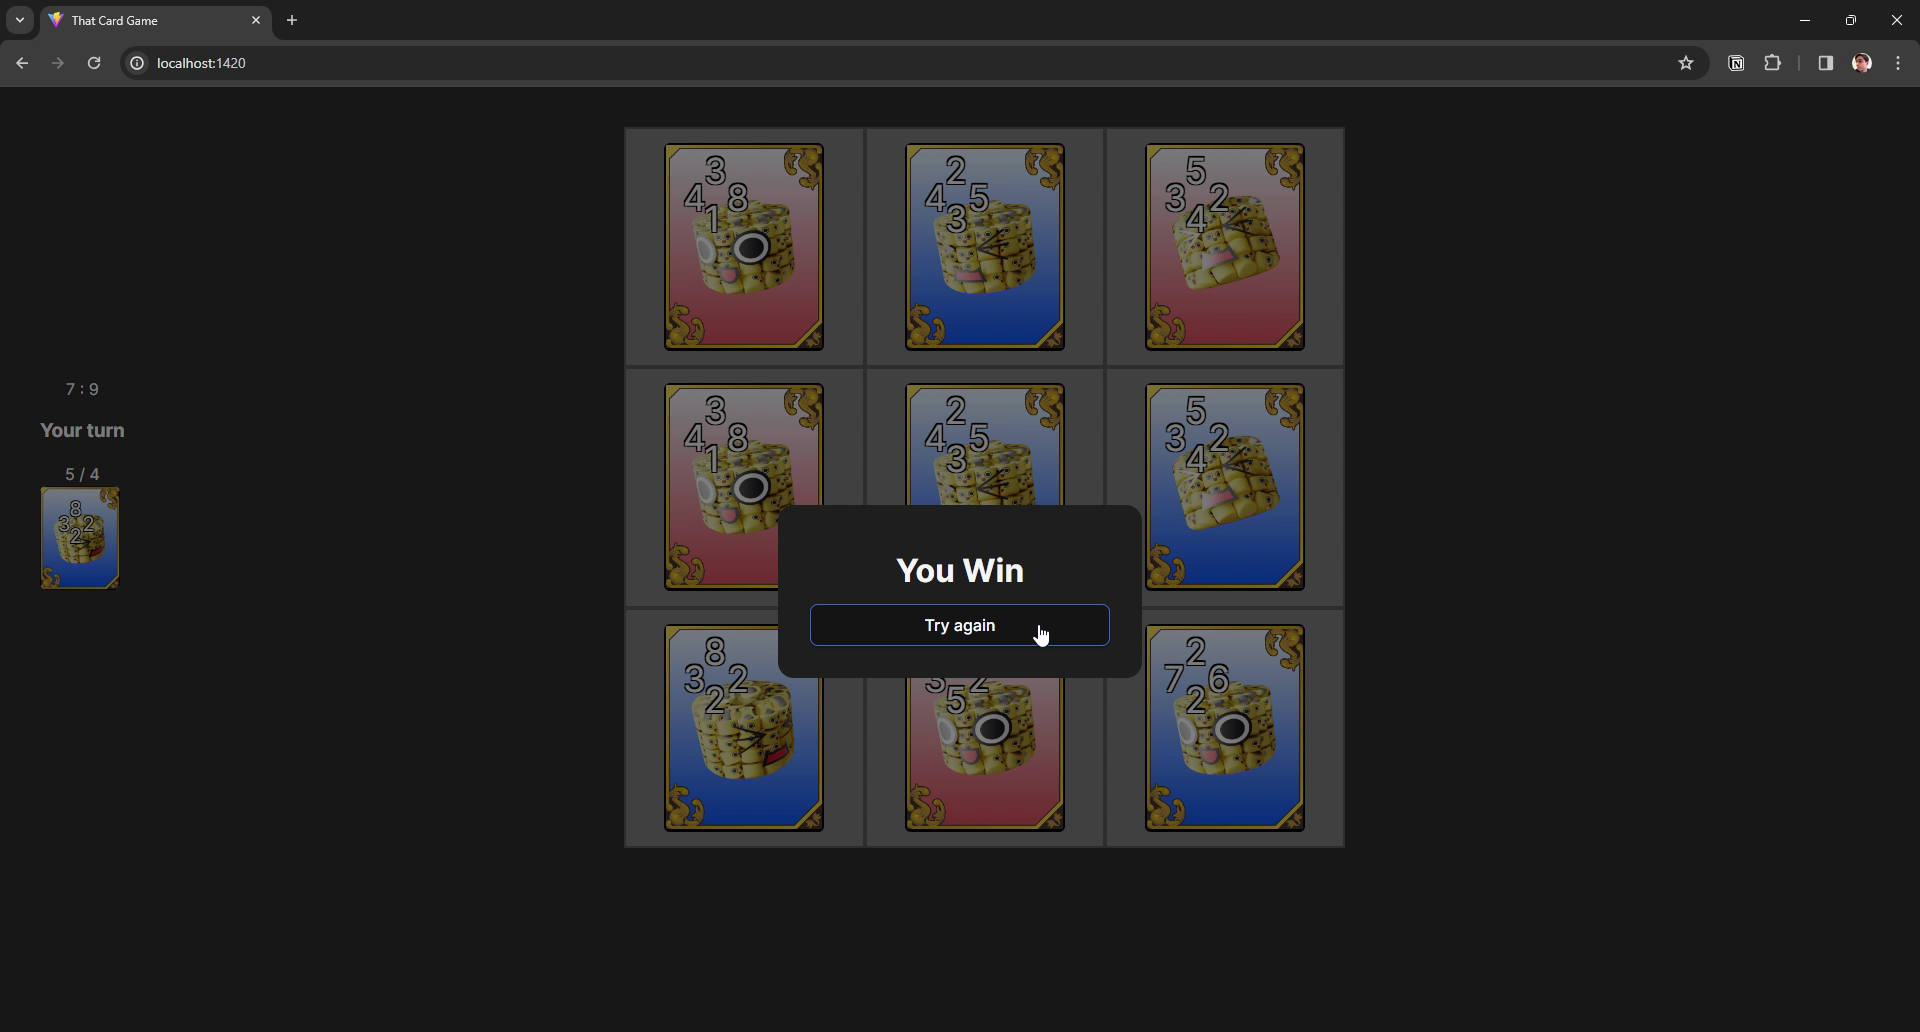 A modal appears over the game with a black transparent overlay. The modal reads “You Win” with a button labeled “Try Again”.